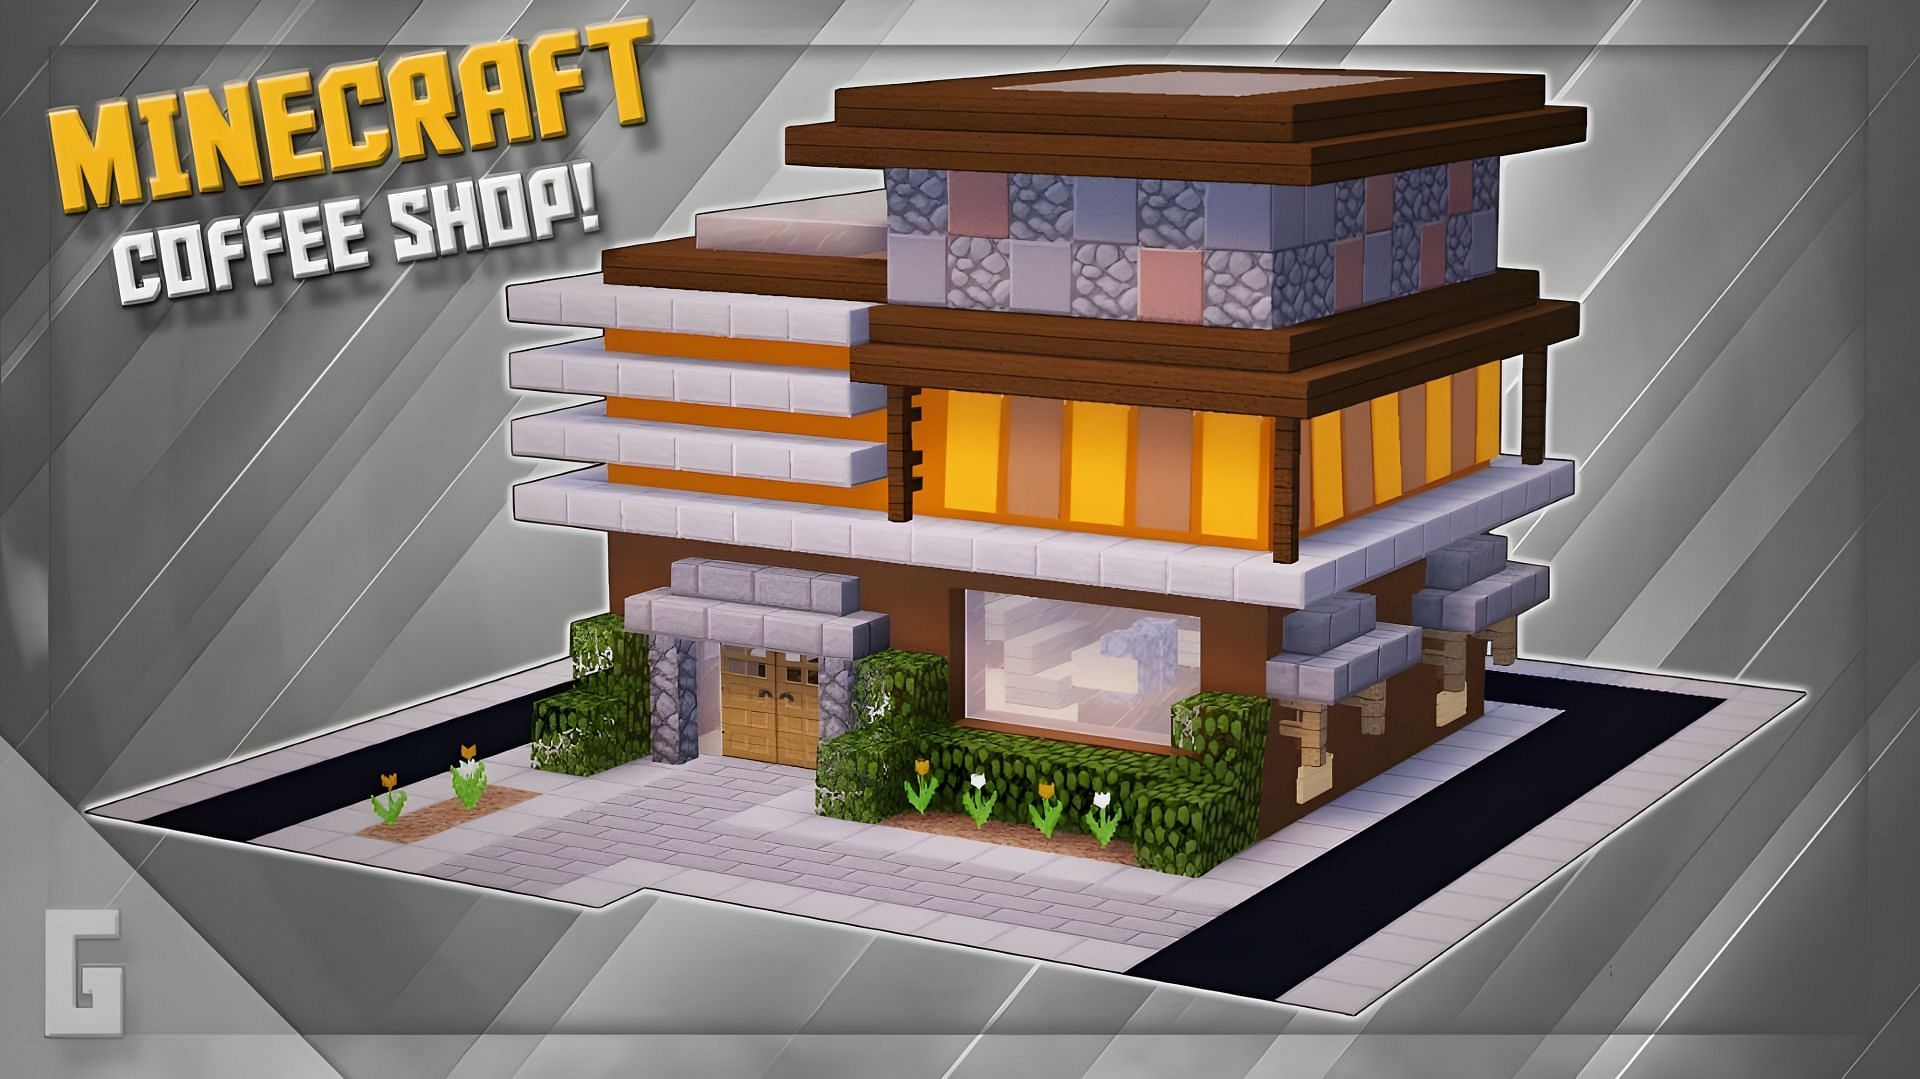 Minecraft coffee shop builds are brilliant (Image via Youtube/Greg Builds)